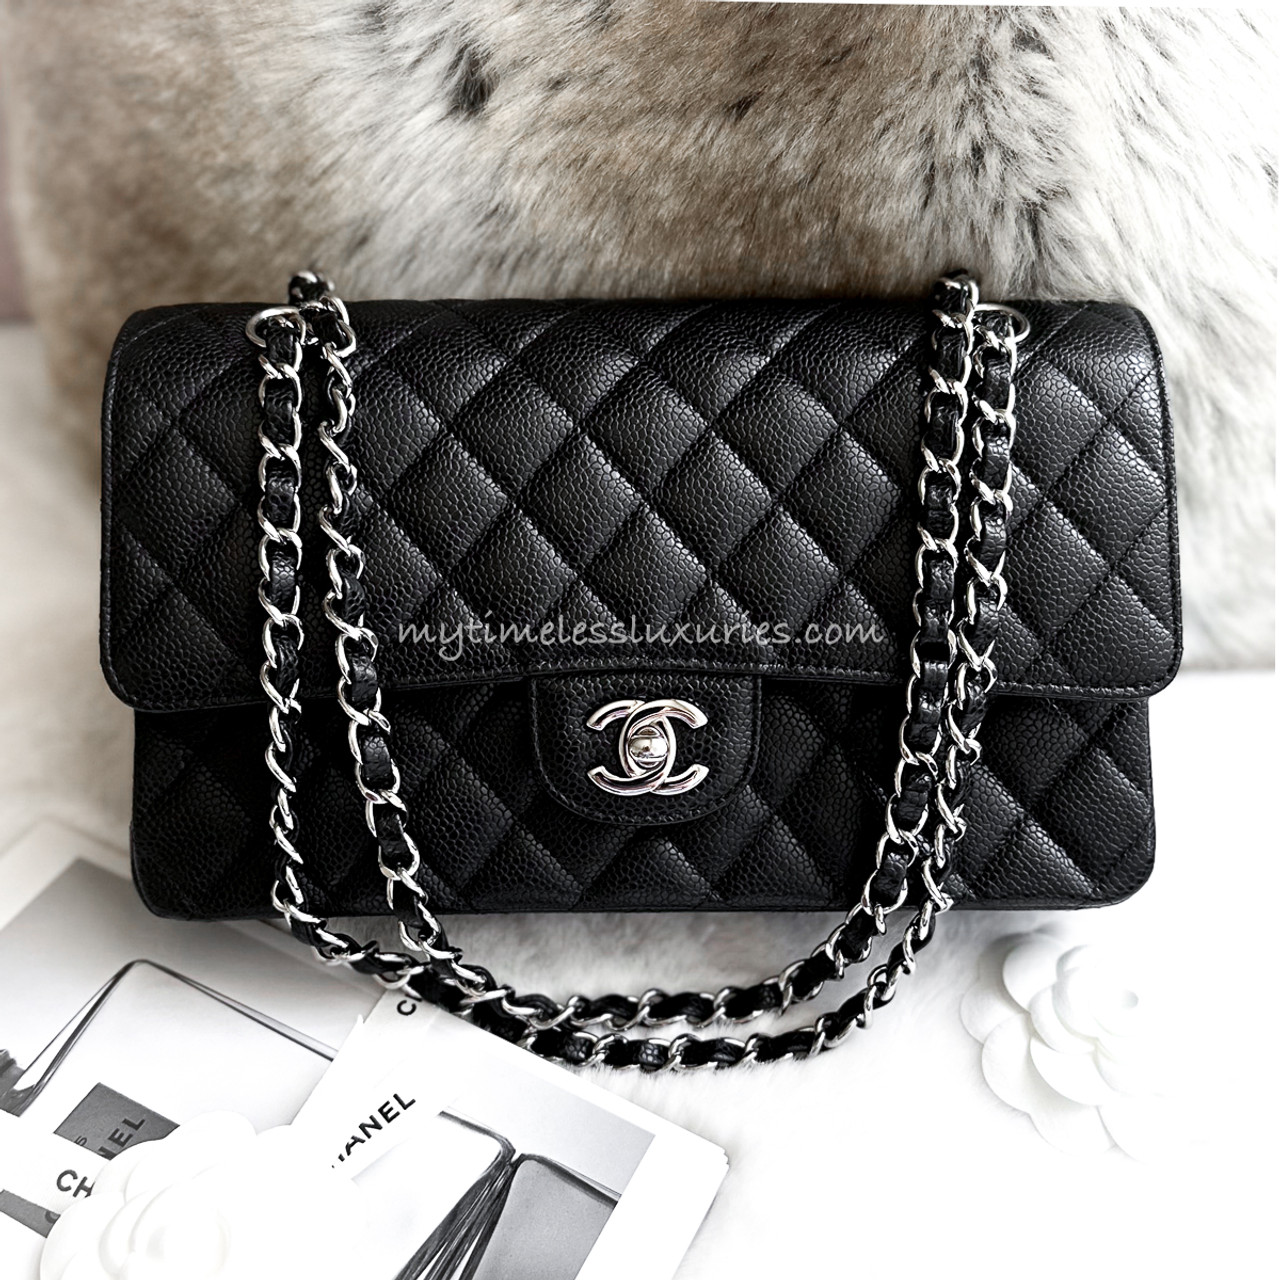 Chanel Caramel Quilted Lambskin Medium Classic Double Flap Bag  Madison  Avenue Couture